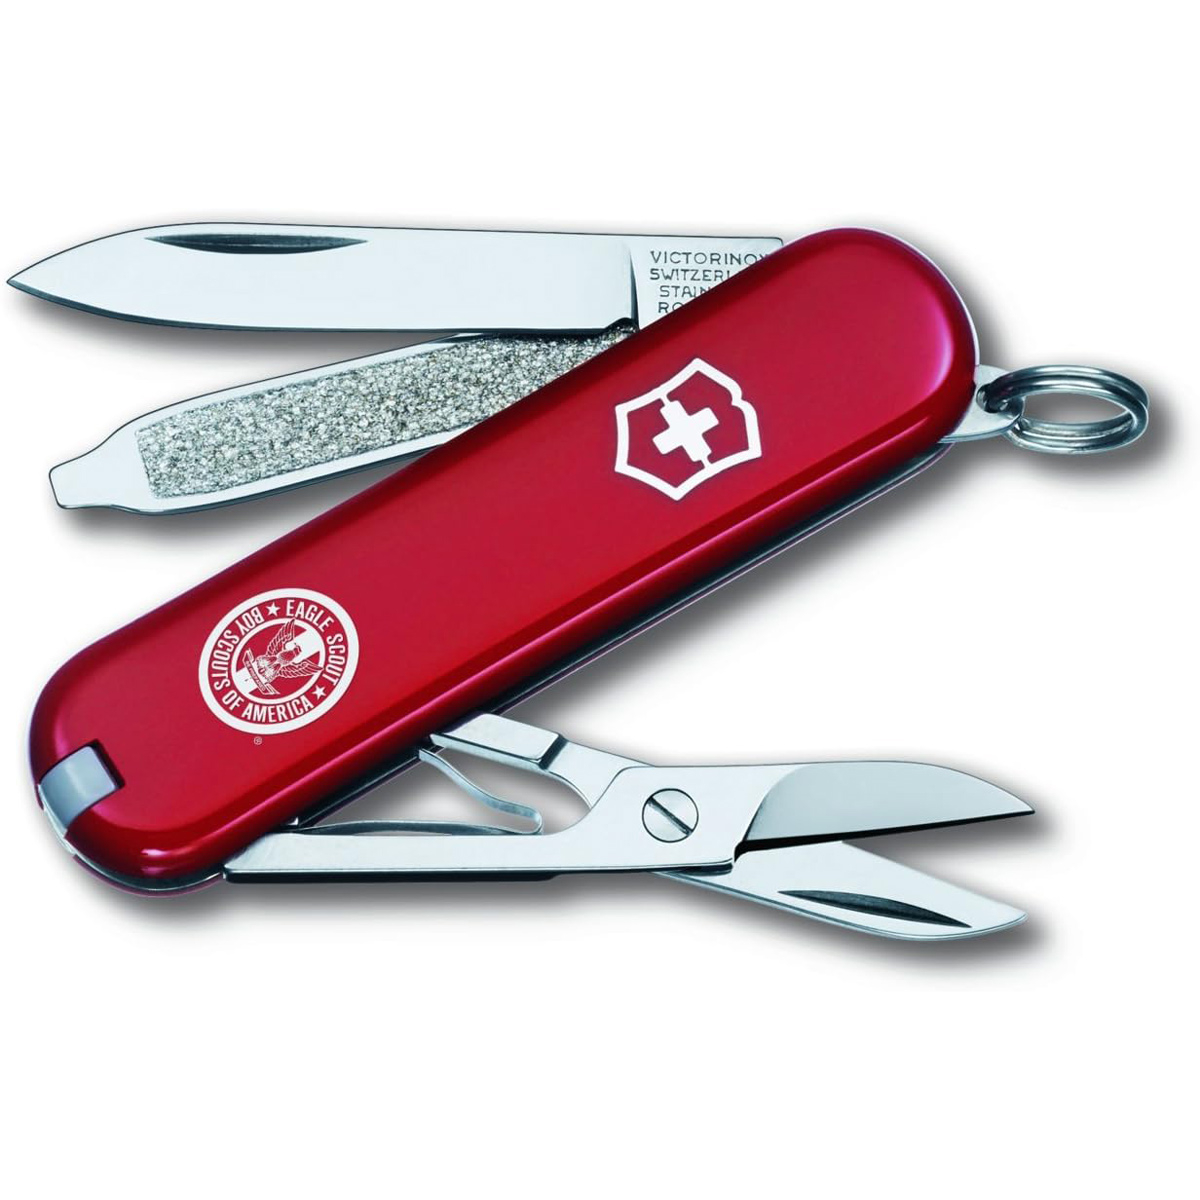 Swiss Eagle Compact Multi-Tool Army Knife - Packs 12 Tools In Your Pocket 